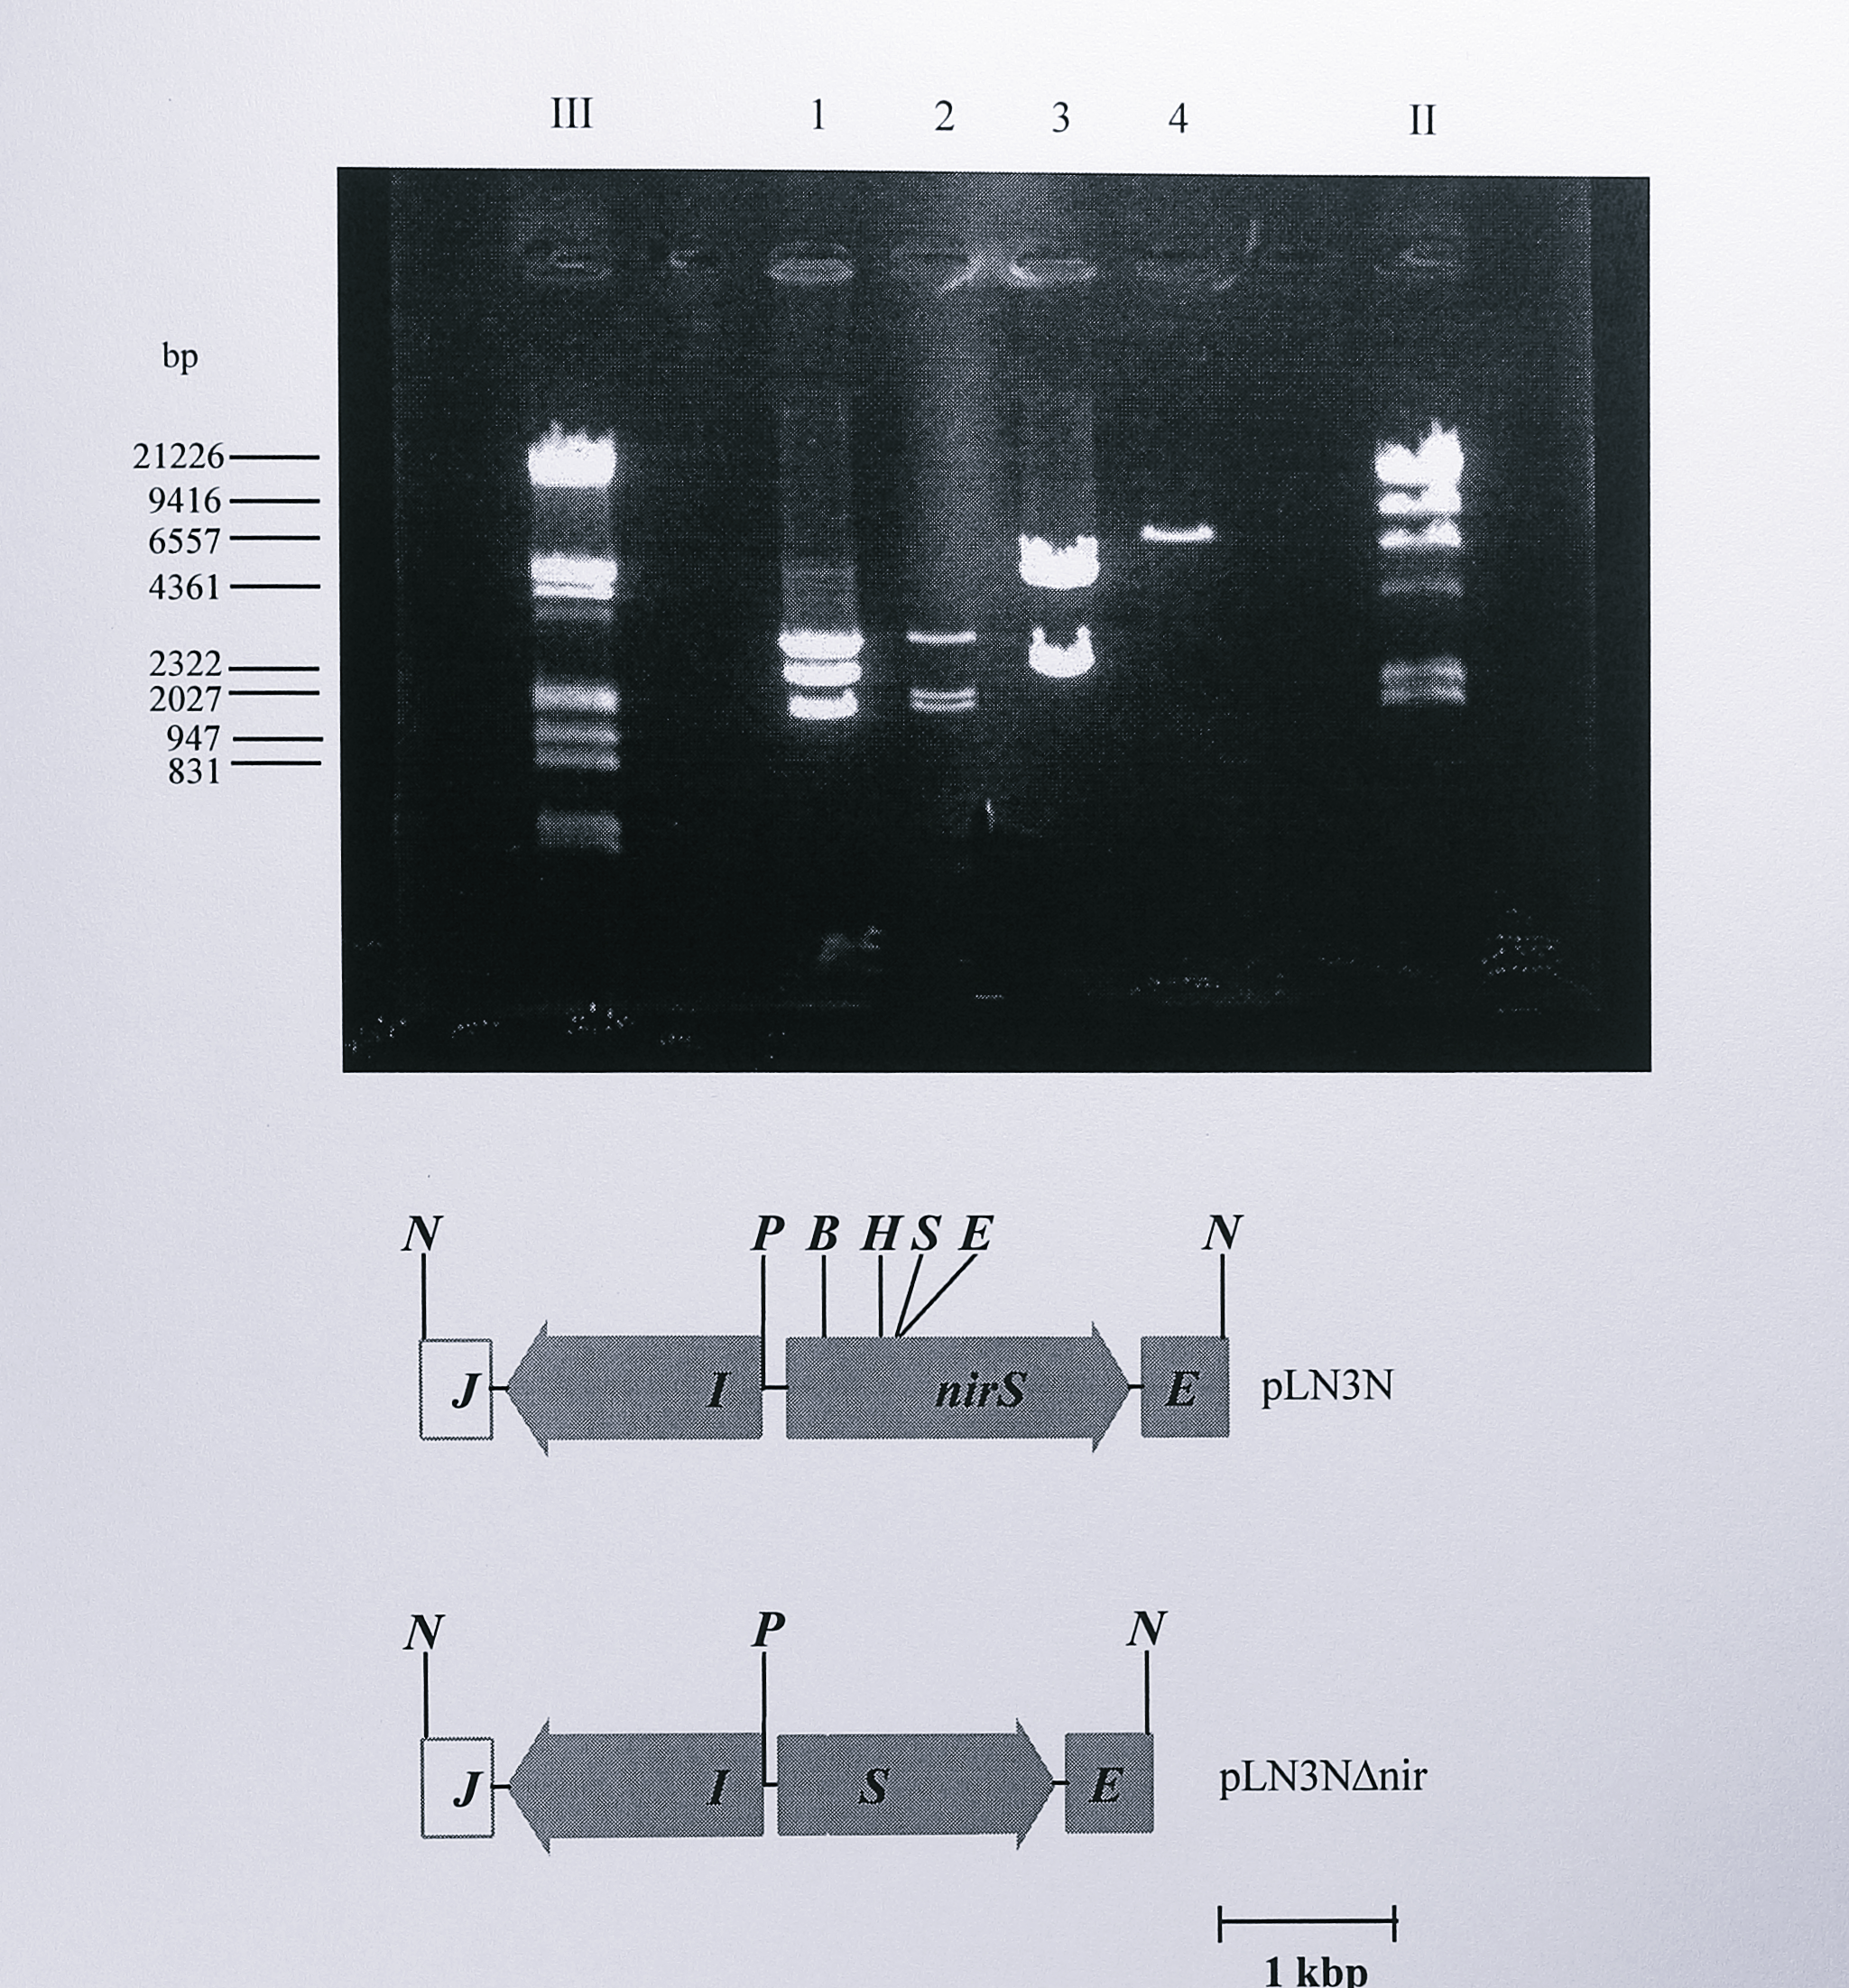 Restriction digest analysis of plasmids pLN3N and pLN3N$\Delta$nir. Following ligation and transformation, plasmid DNA was isolated from the transformed cells and digested using _PstI_ plus _NotI_ (lanes 1 and 2) or _SalI_ (lanes 3 and 4). The digested DNA was separated by electrophoresis on a 0.8% agarose gel. Lanes 1 and 3 contain DNA from pLN3N, lanes 2 and 4 contain DNA from pLN3N$\Delta$nir. In lane 1, three fragments of approximate sizes 3, 2.4 and 1.8 kbp are seen. The two smaller fragments correspond to the _NotI_ insert from pLN3N. In lane 2 the 2.4 kbp fragment has moved to 2 kbp, due to the removal of the 382 bp _BamHI_ - _EcoRI_ fragment. Lane 3 shows two _SalI_ fragments from pLN3N. In lane 4 the internal _SalI_ site in the 382 bp _BamHI_ - _EcoRI_ fragment has been lost, giving a linearised plasmid of approximate size 6.9 kbp. Enzymes: B, _BamHI_, E, _EcoRI_, H, _HindIII_, N, _NotI_, P, I, S, _SalI_. Lanes labelled III and II contain DNA size standards, some of which are indicated at the left of the gel.